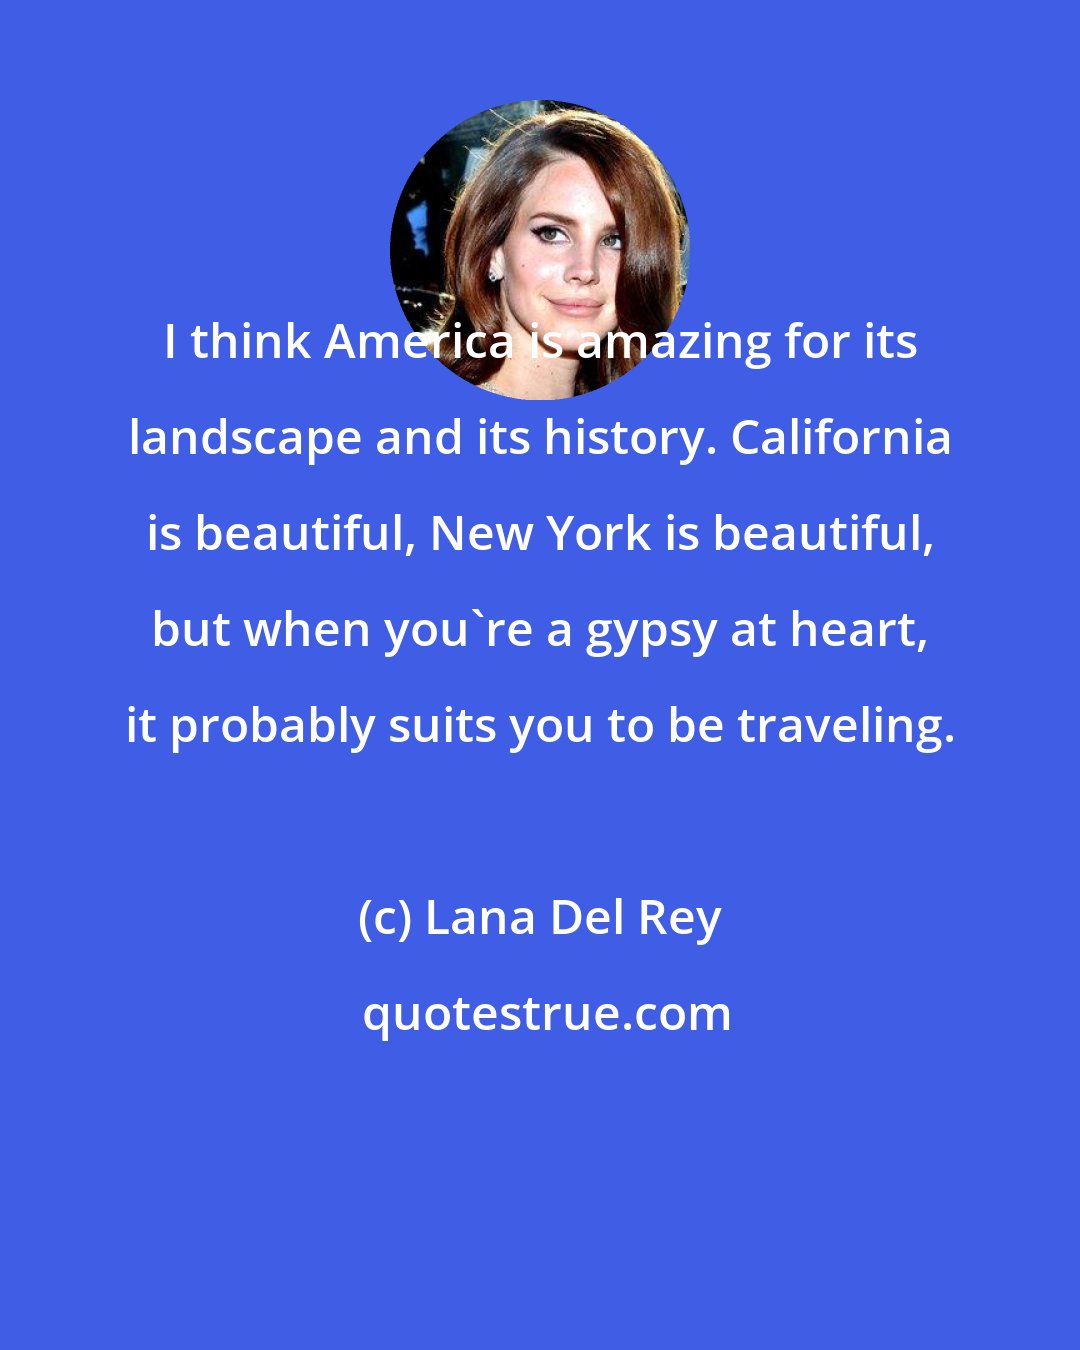 Lana Del Rey: I think America is amazing for its landscape and its history. California is beautiful, New York is beautiful, but when you're a gypsy at heart, it probably suits you to be traveling.